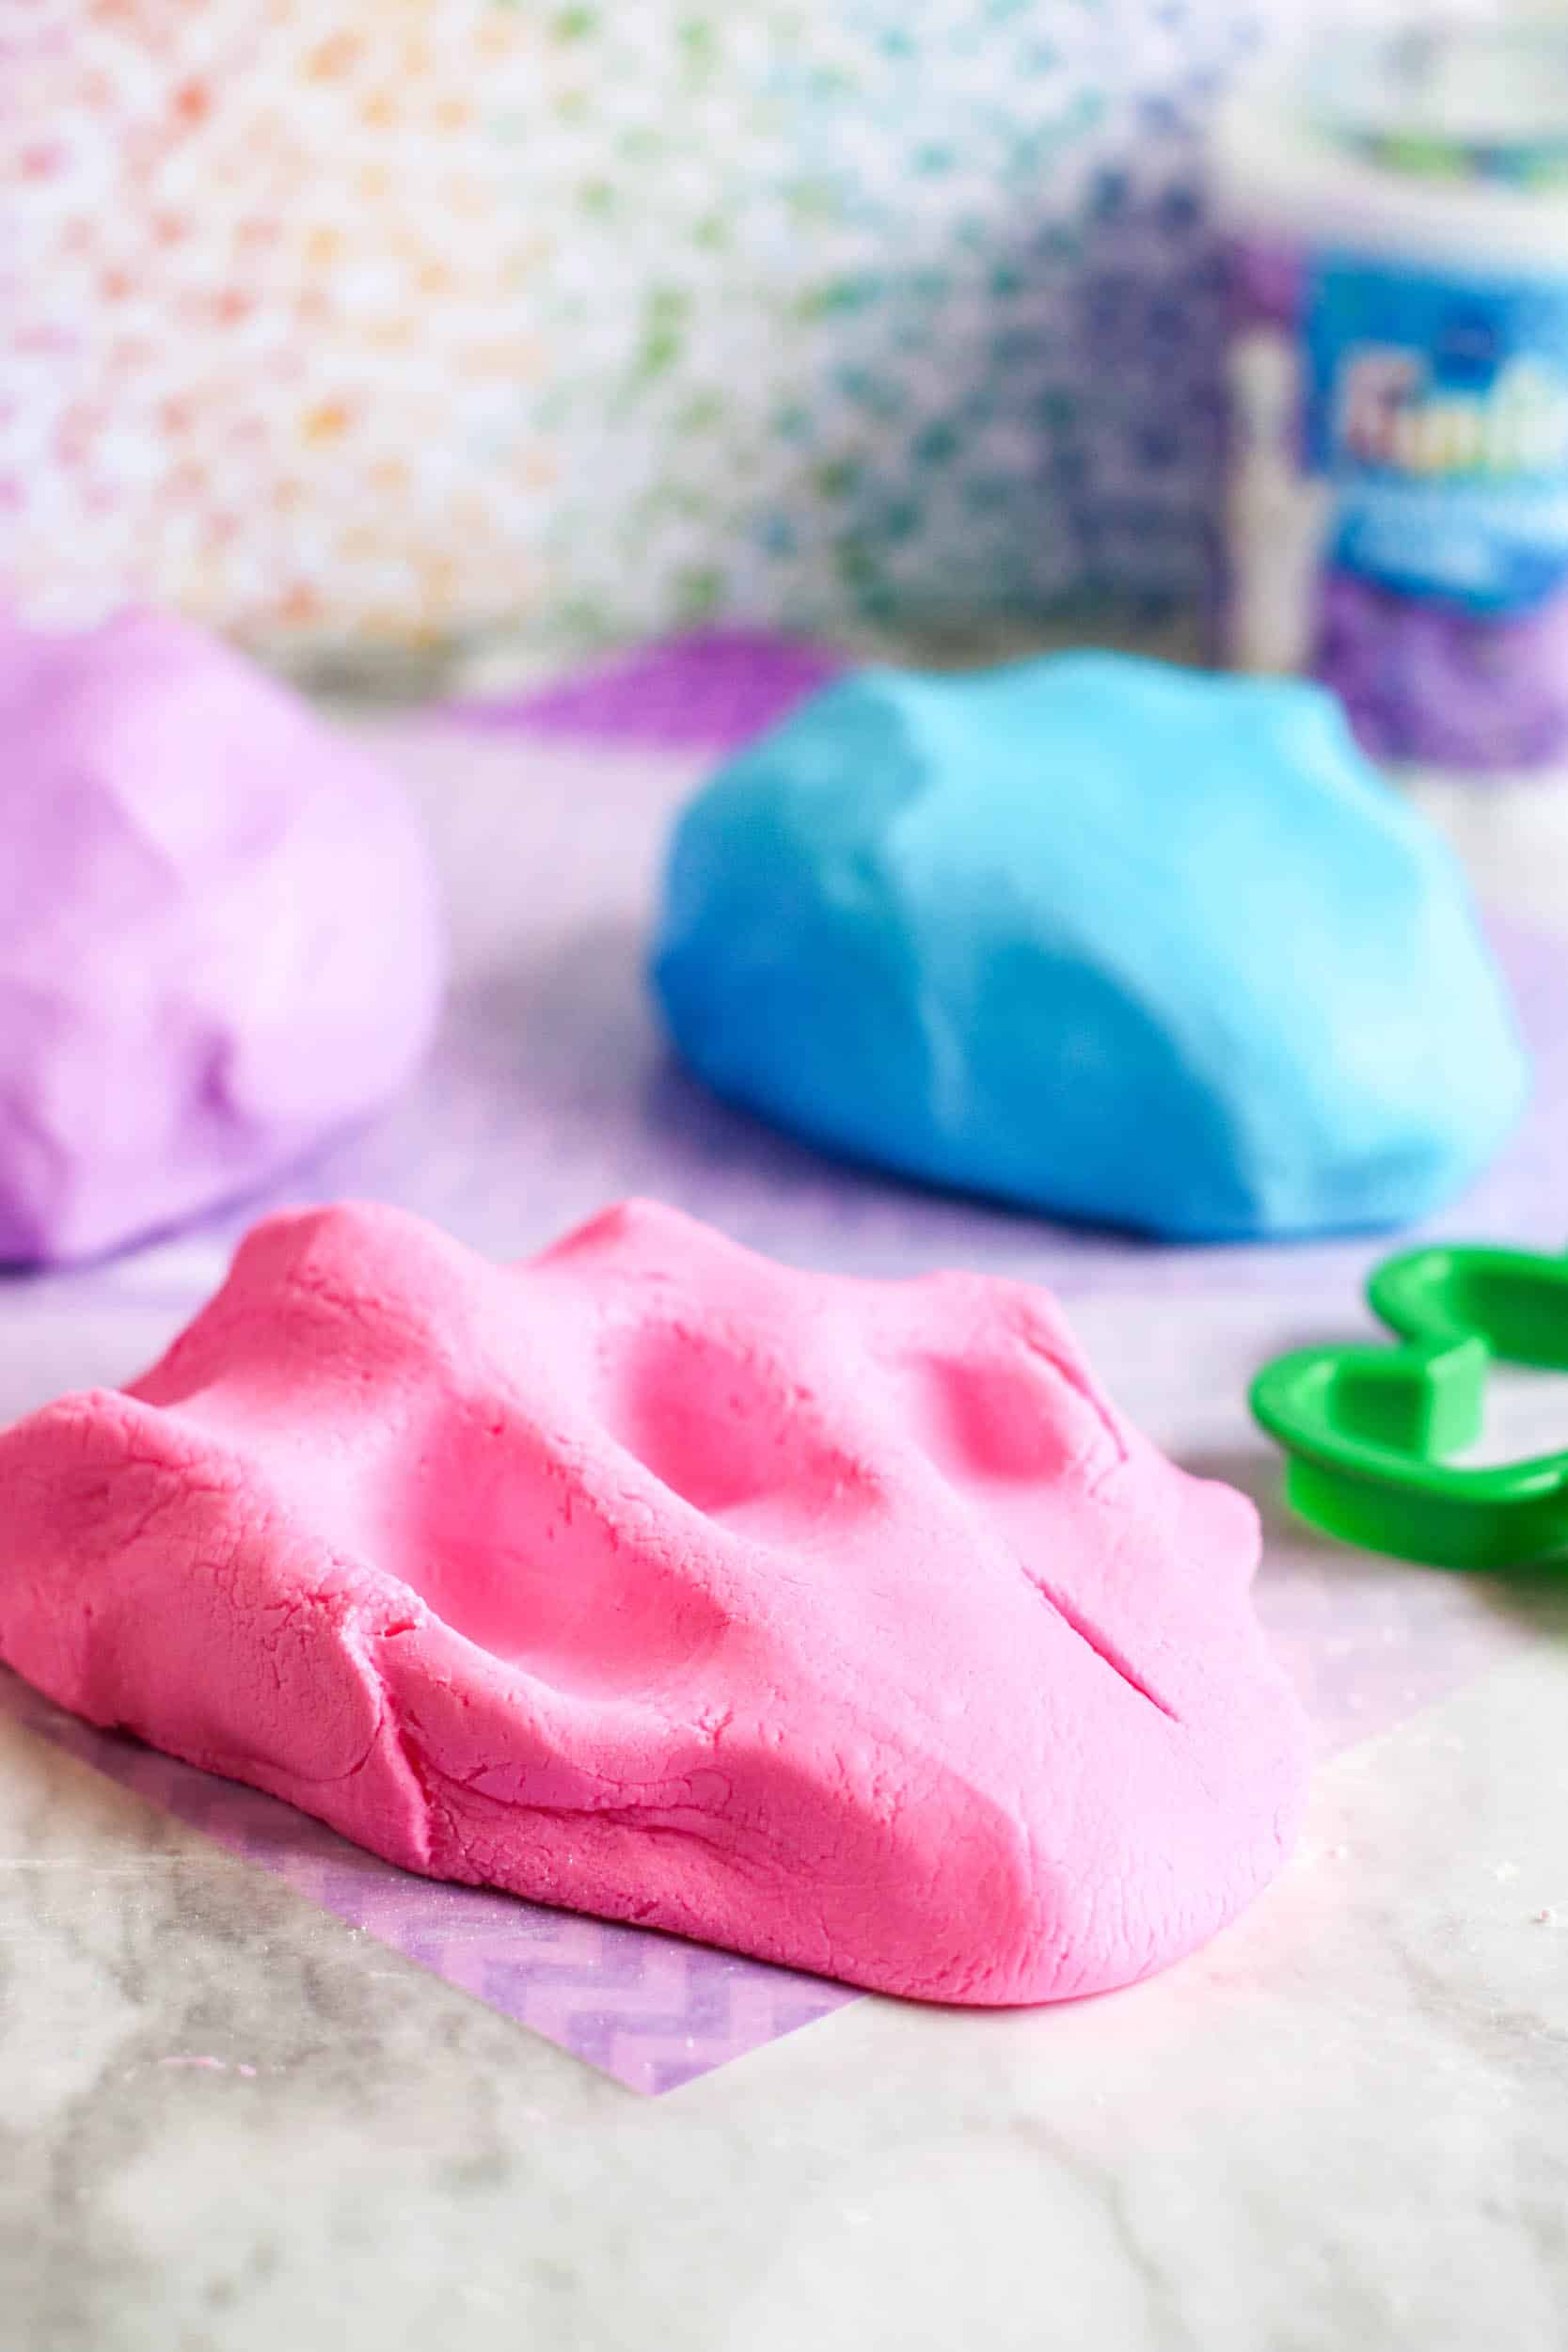 How to Make Edible Playdough with Frosting